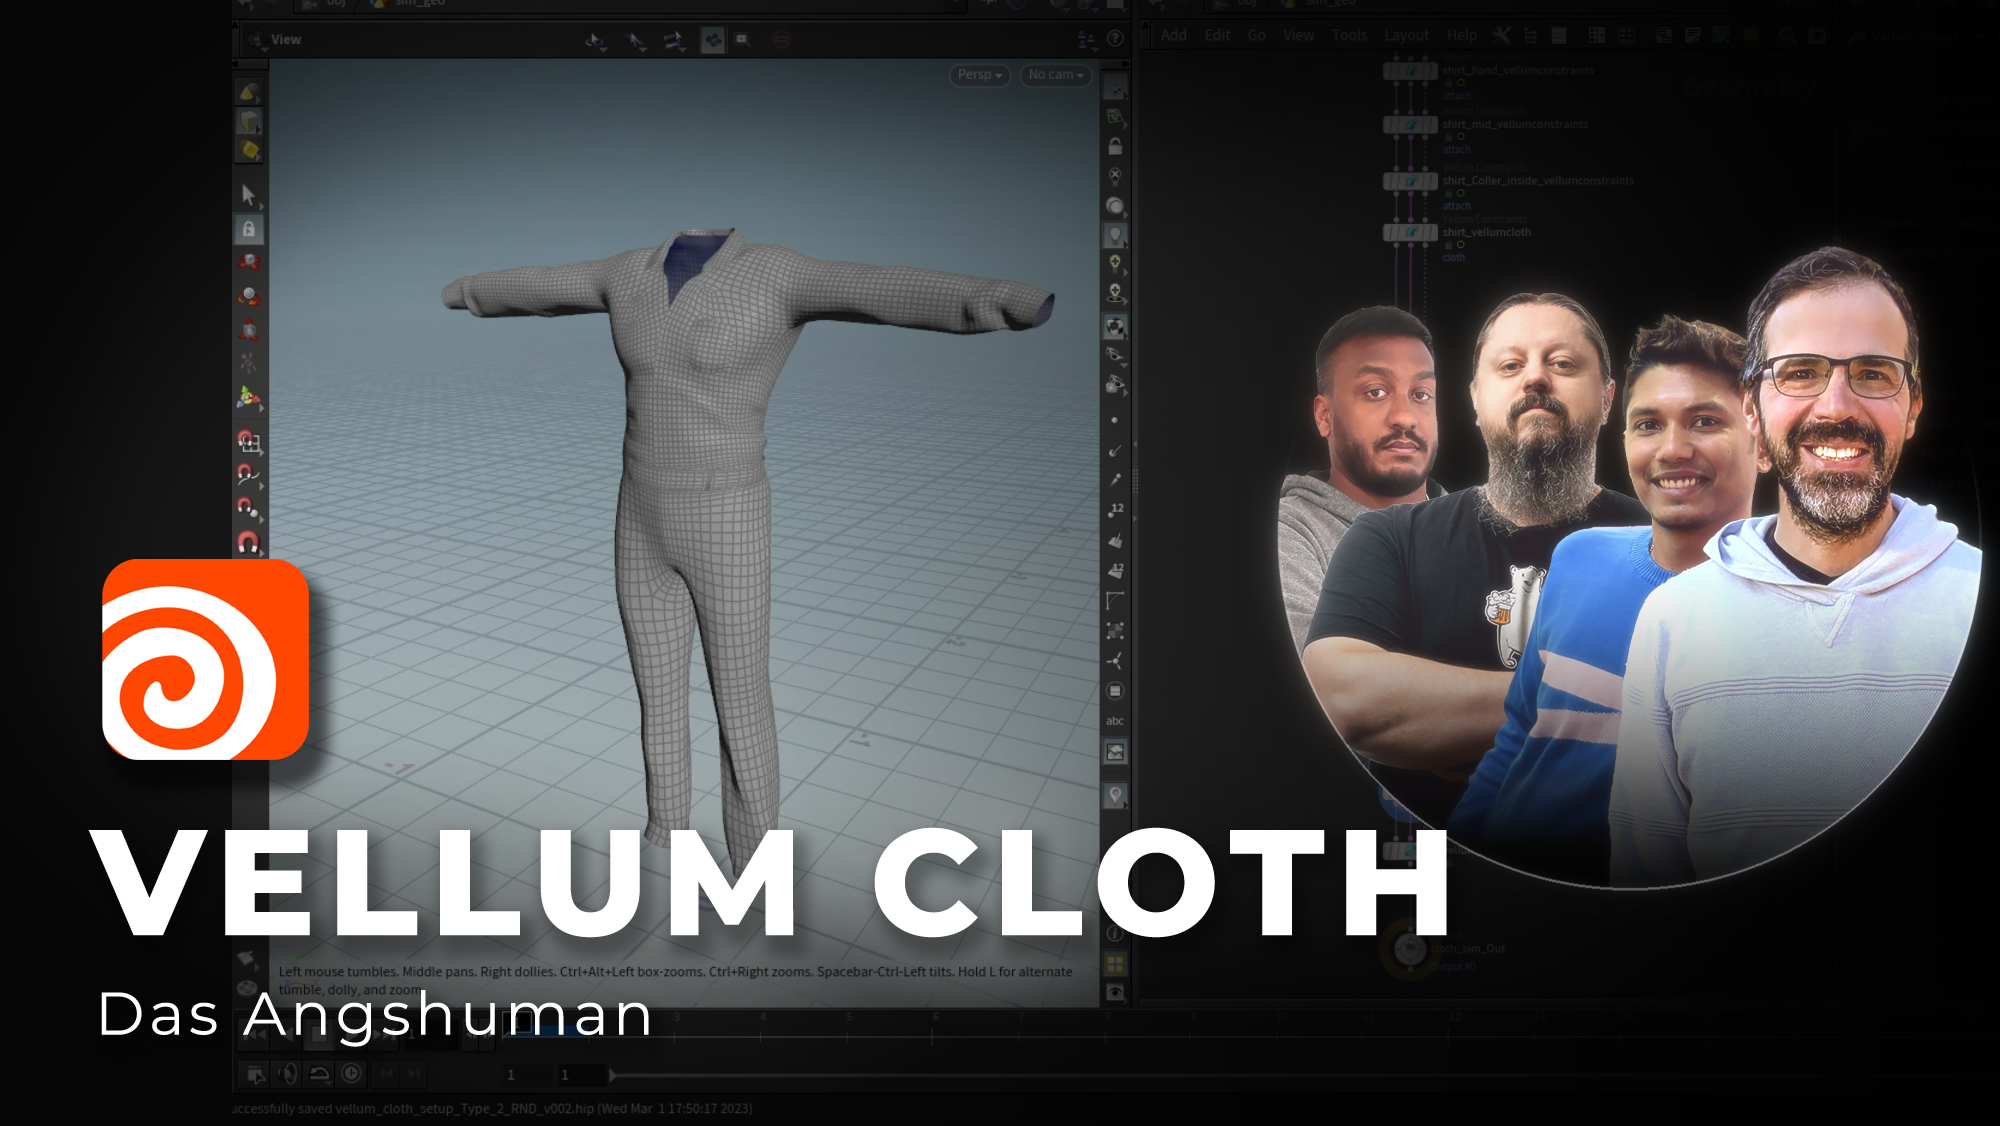 HOUDINI | VELLUM CLOTH | proposed by Das Angshuman